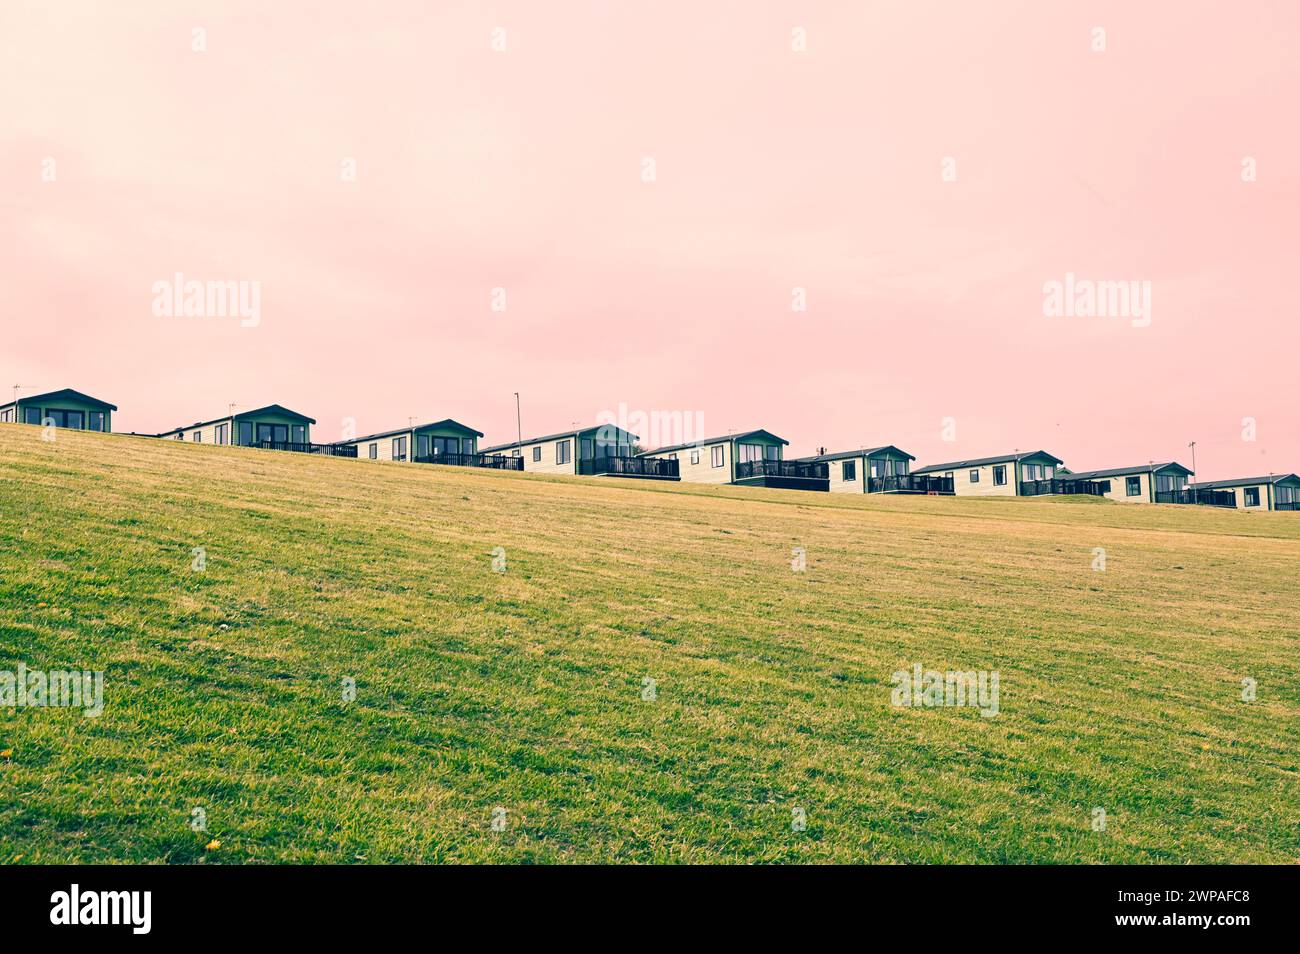 A row of caravans on a minimalist landscape in Cornwall Stock Photo